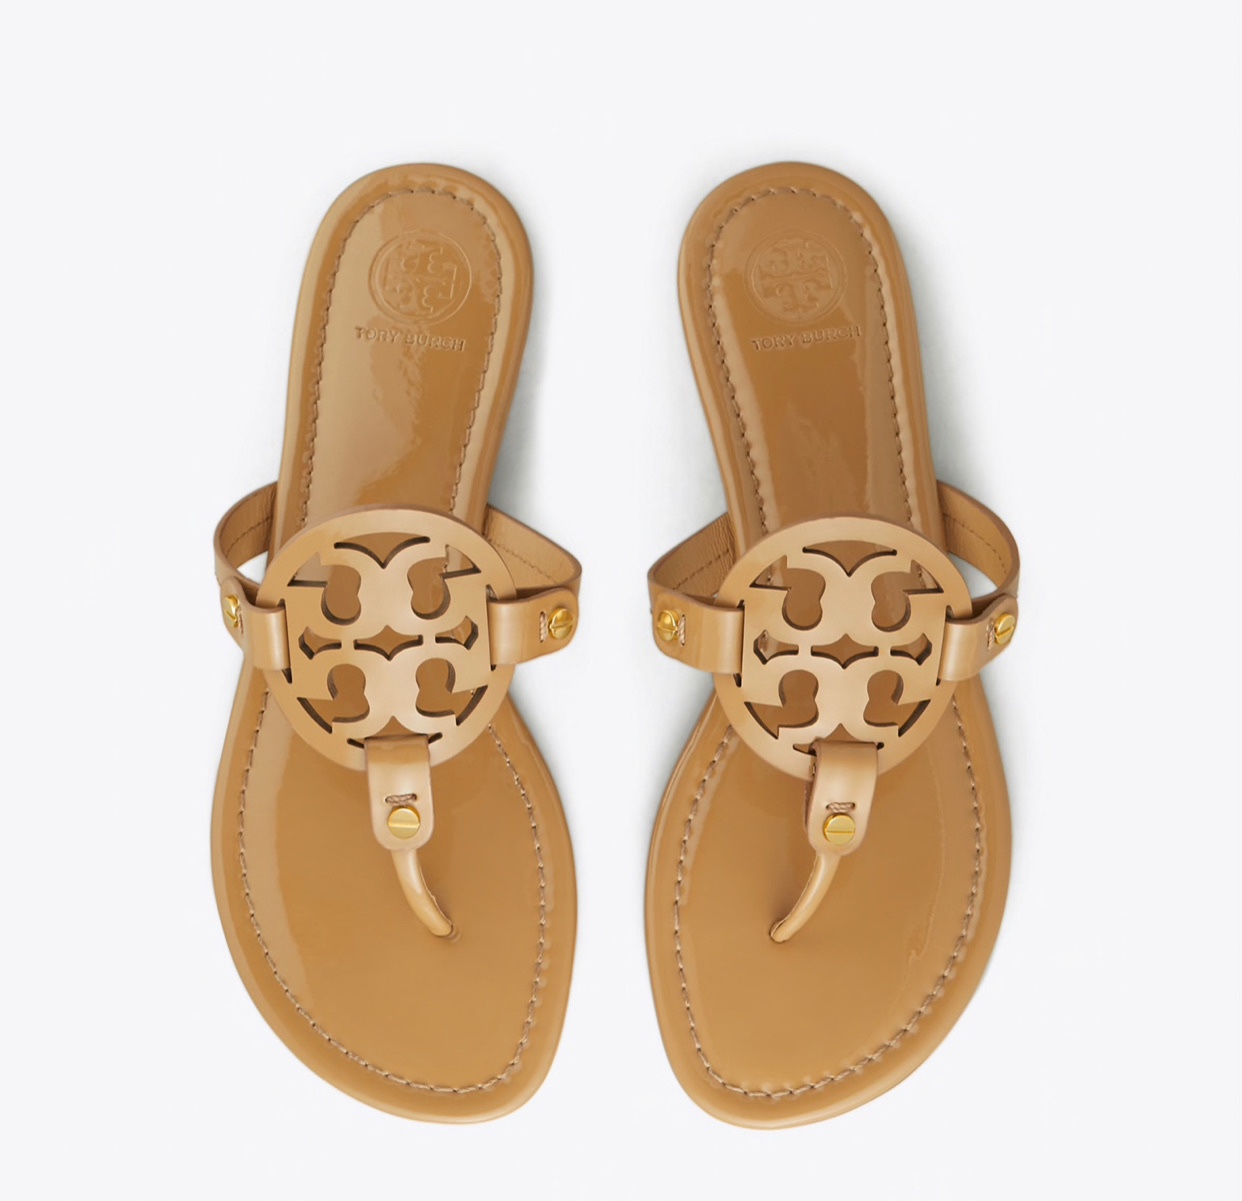 A bunch of Tory Burch sandals are over 30% off at Nordstrom